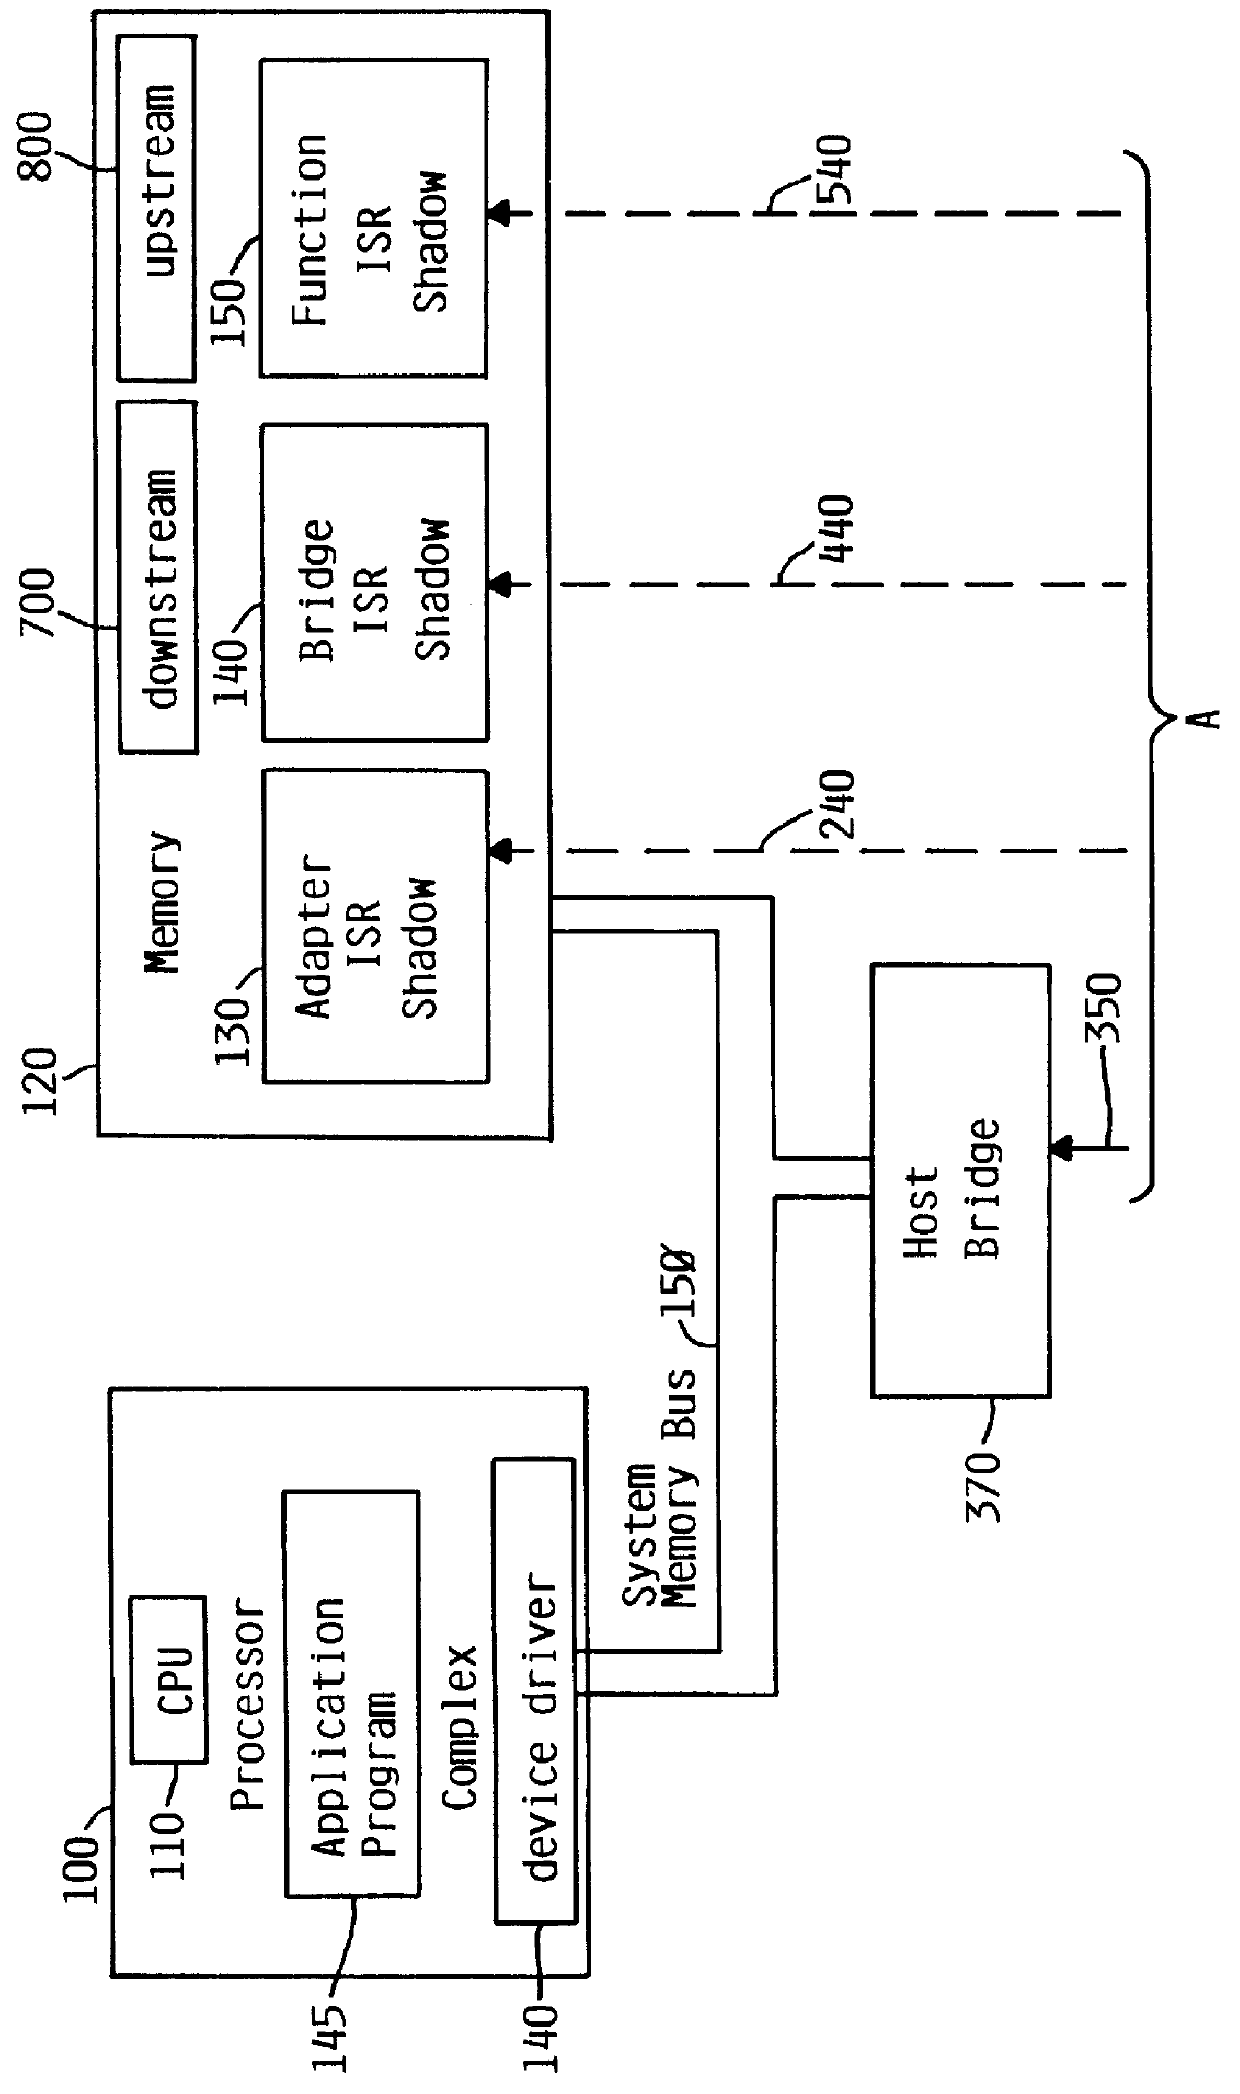 System for determining adapter interrupt status where interrupt is sent to host after operating status stored in register is shadowed to host memory